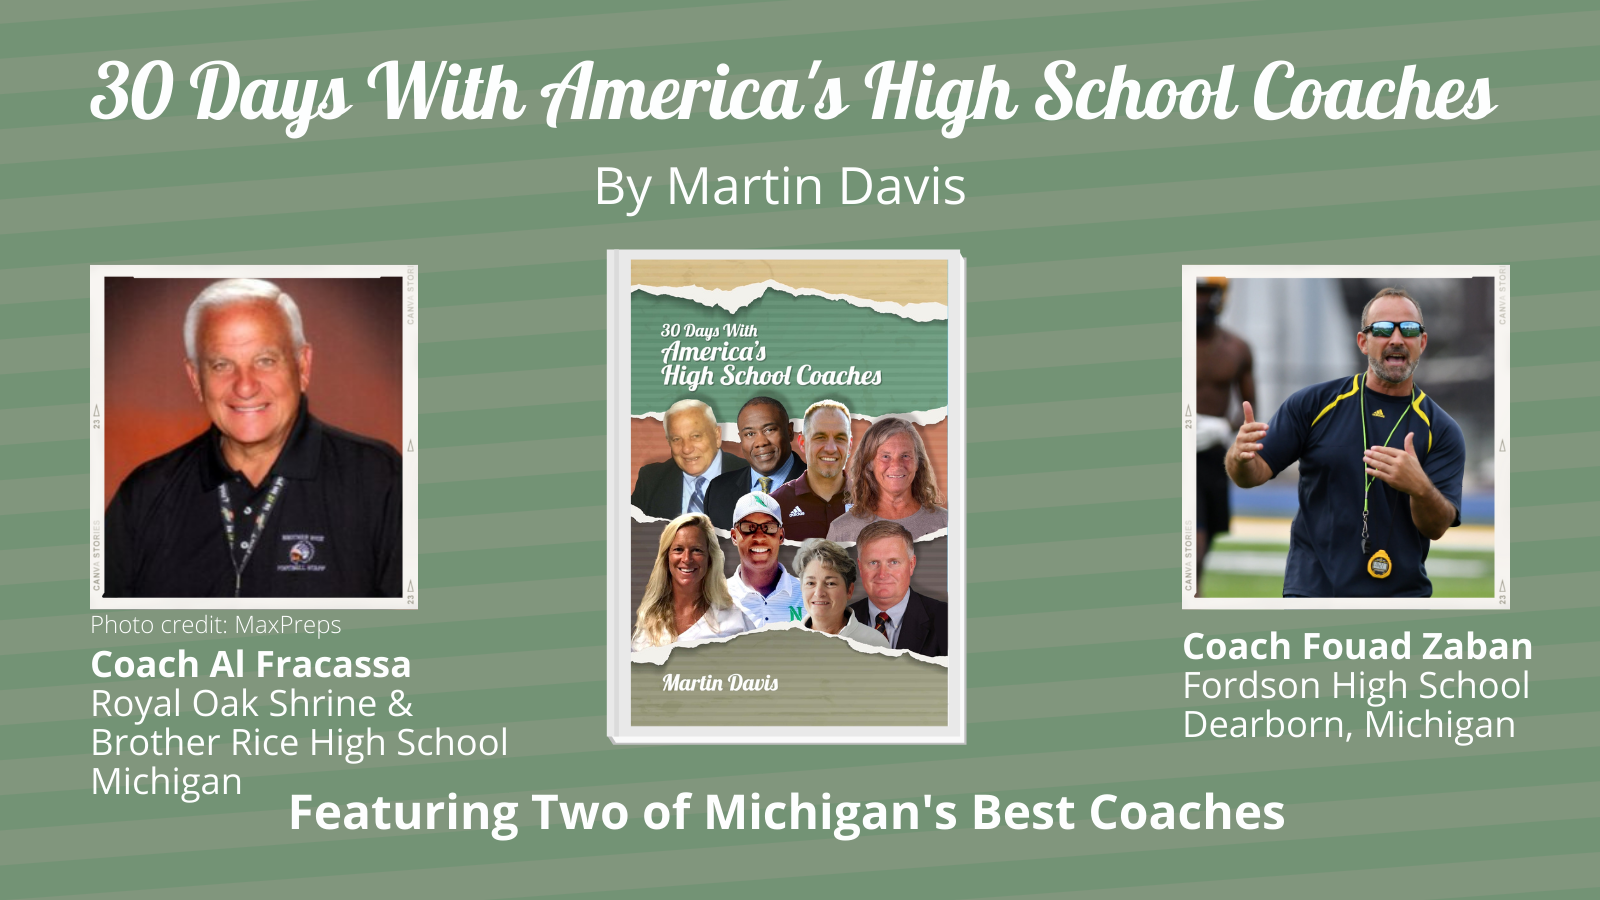 Two Michigan HS Football Coaches recognized in new book - MHSFCA